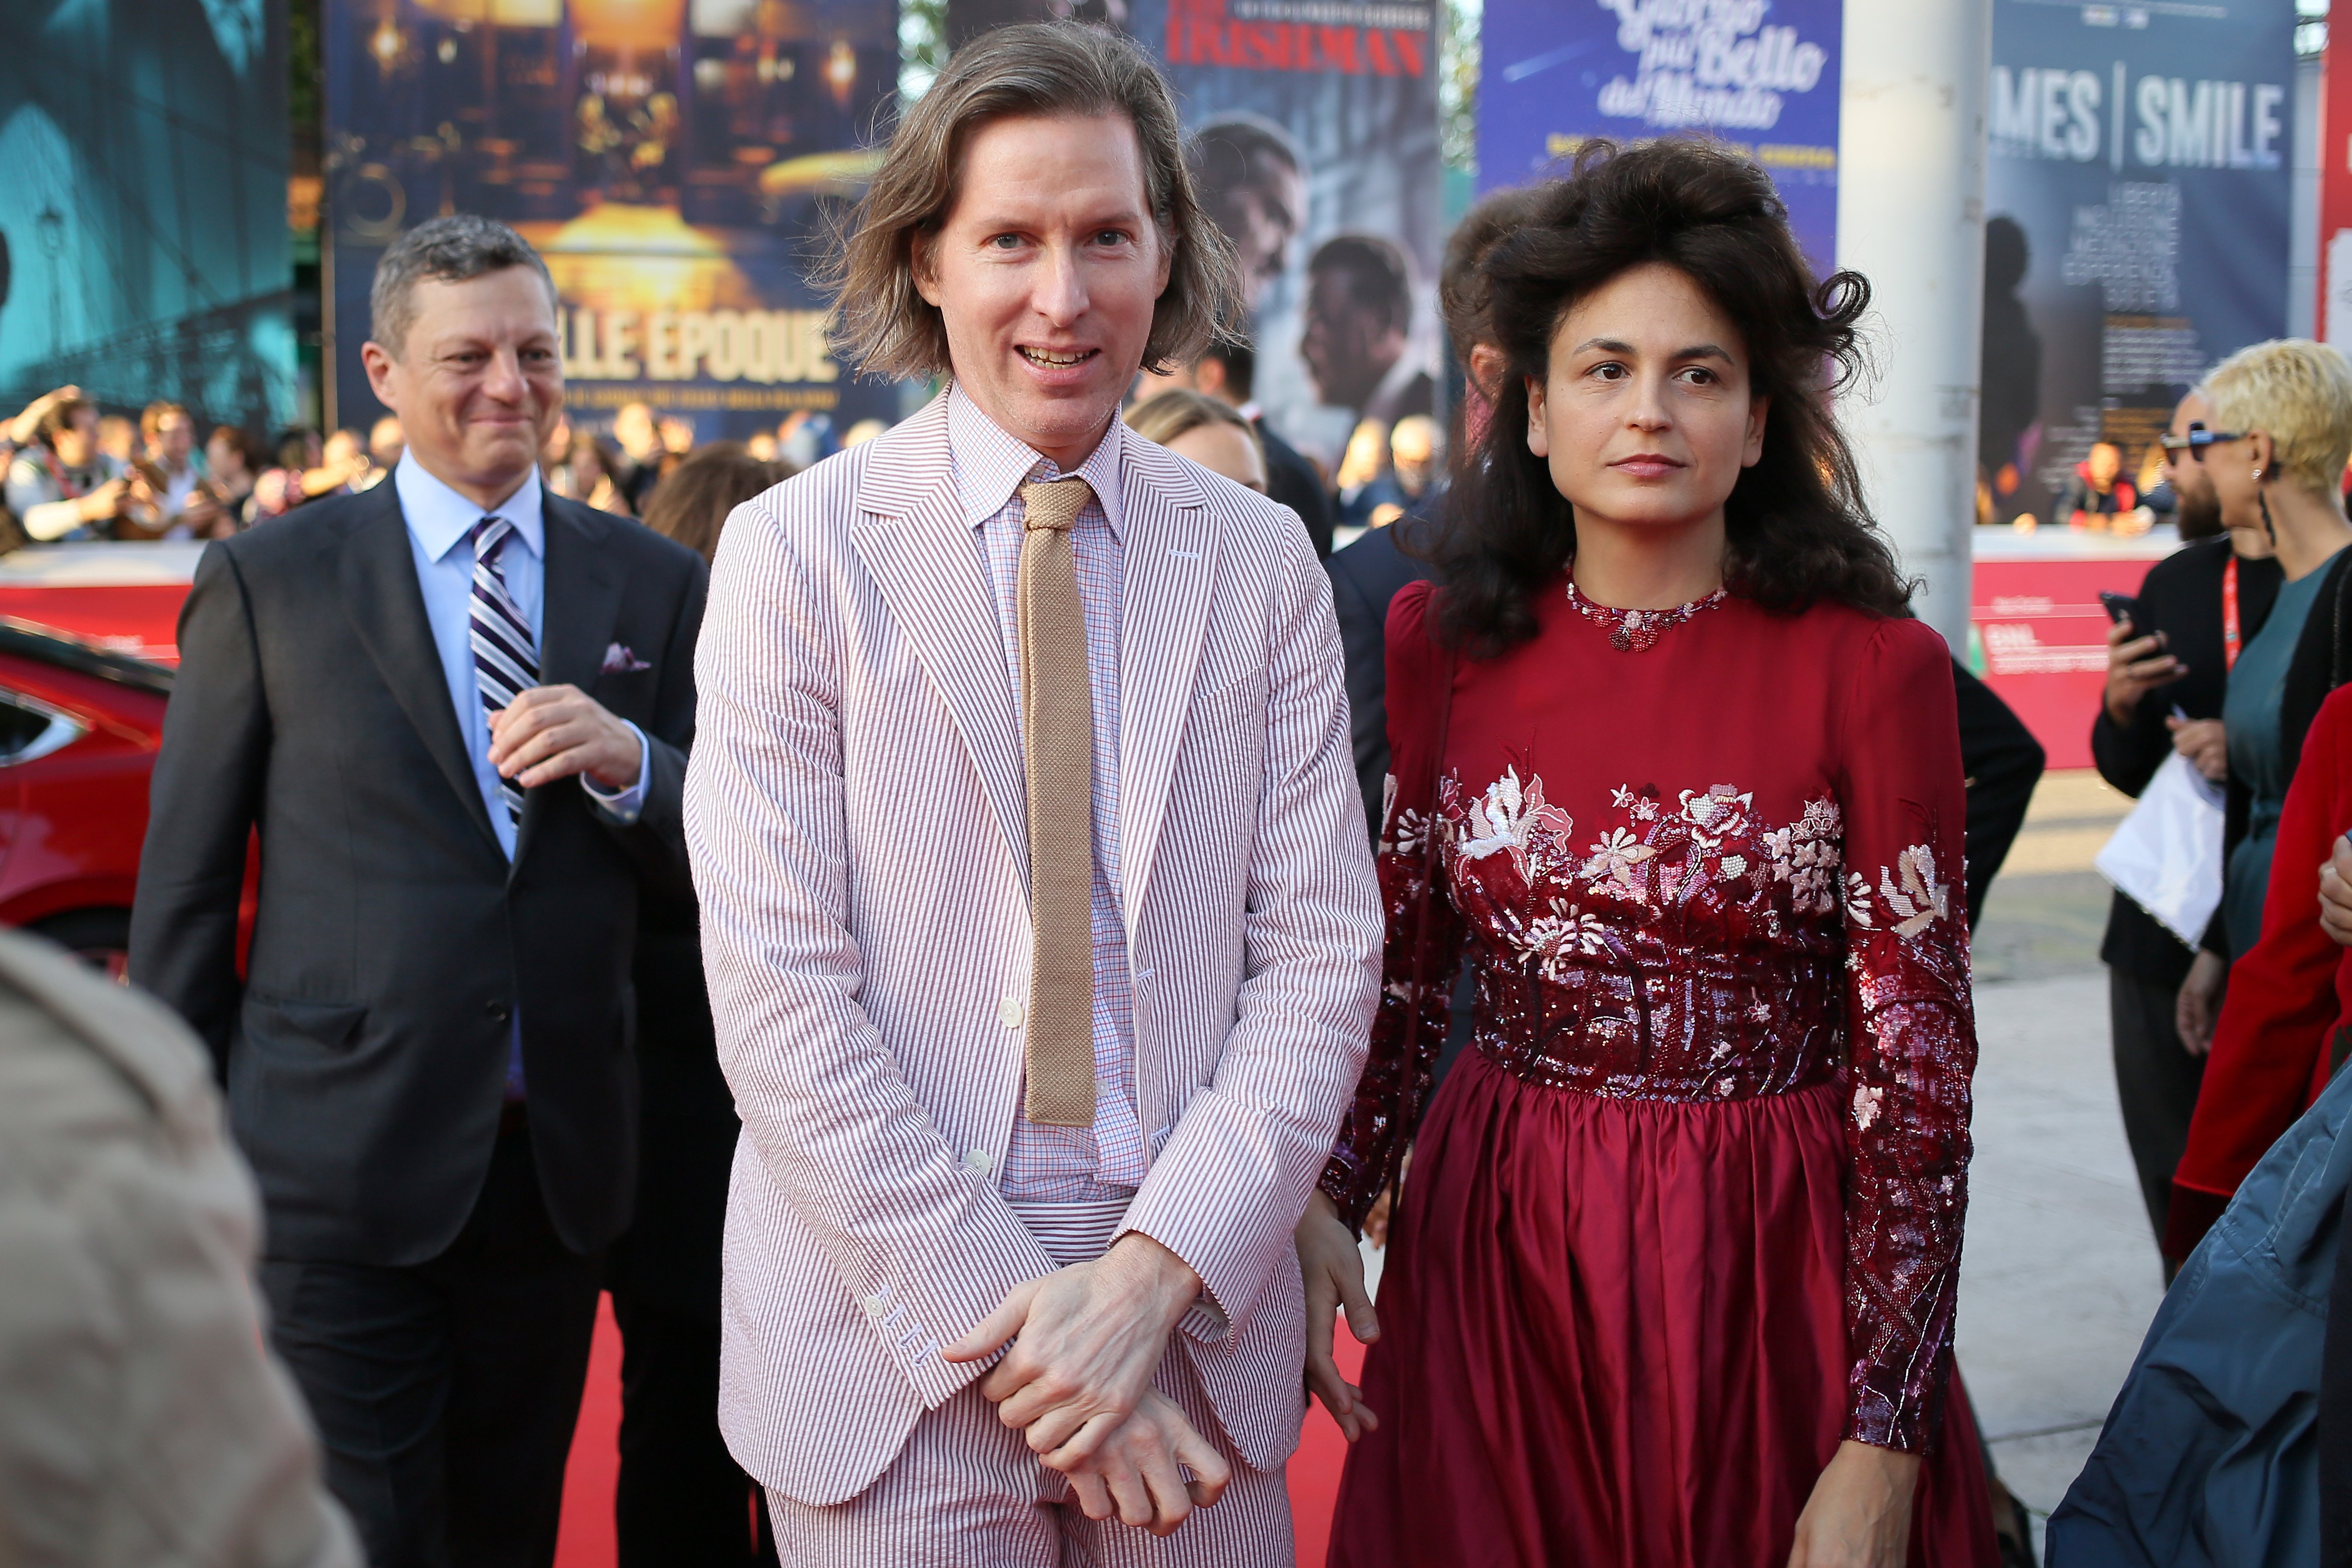 Wes Anderson and Juman Malouf at the 14th Rome Film Festival on October 19, 2019 in Rome. | Source: Getty Images